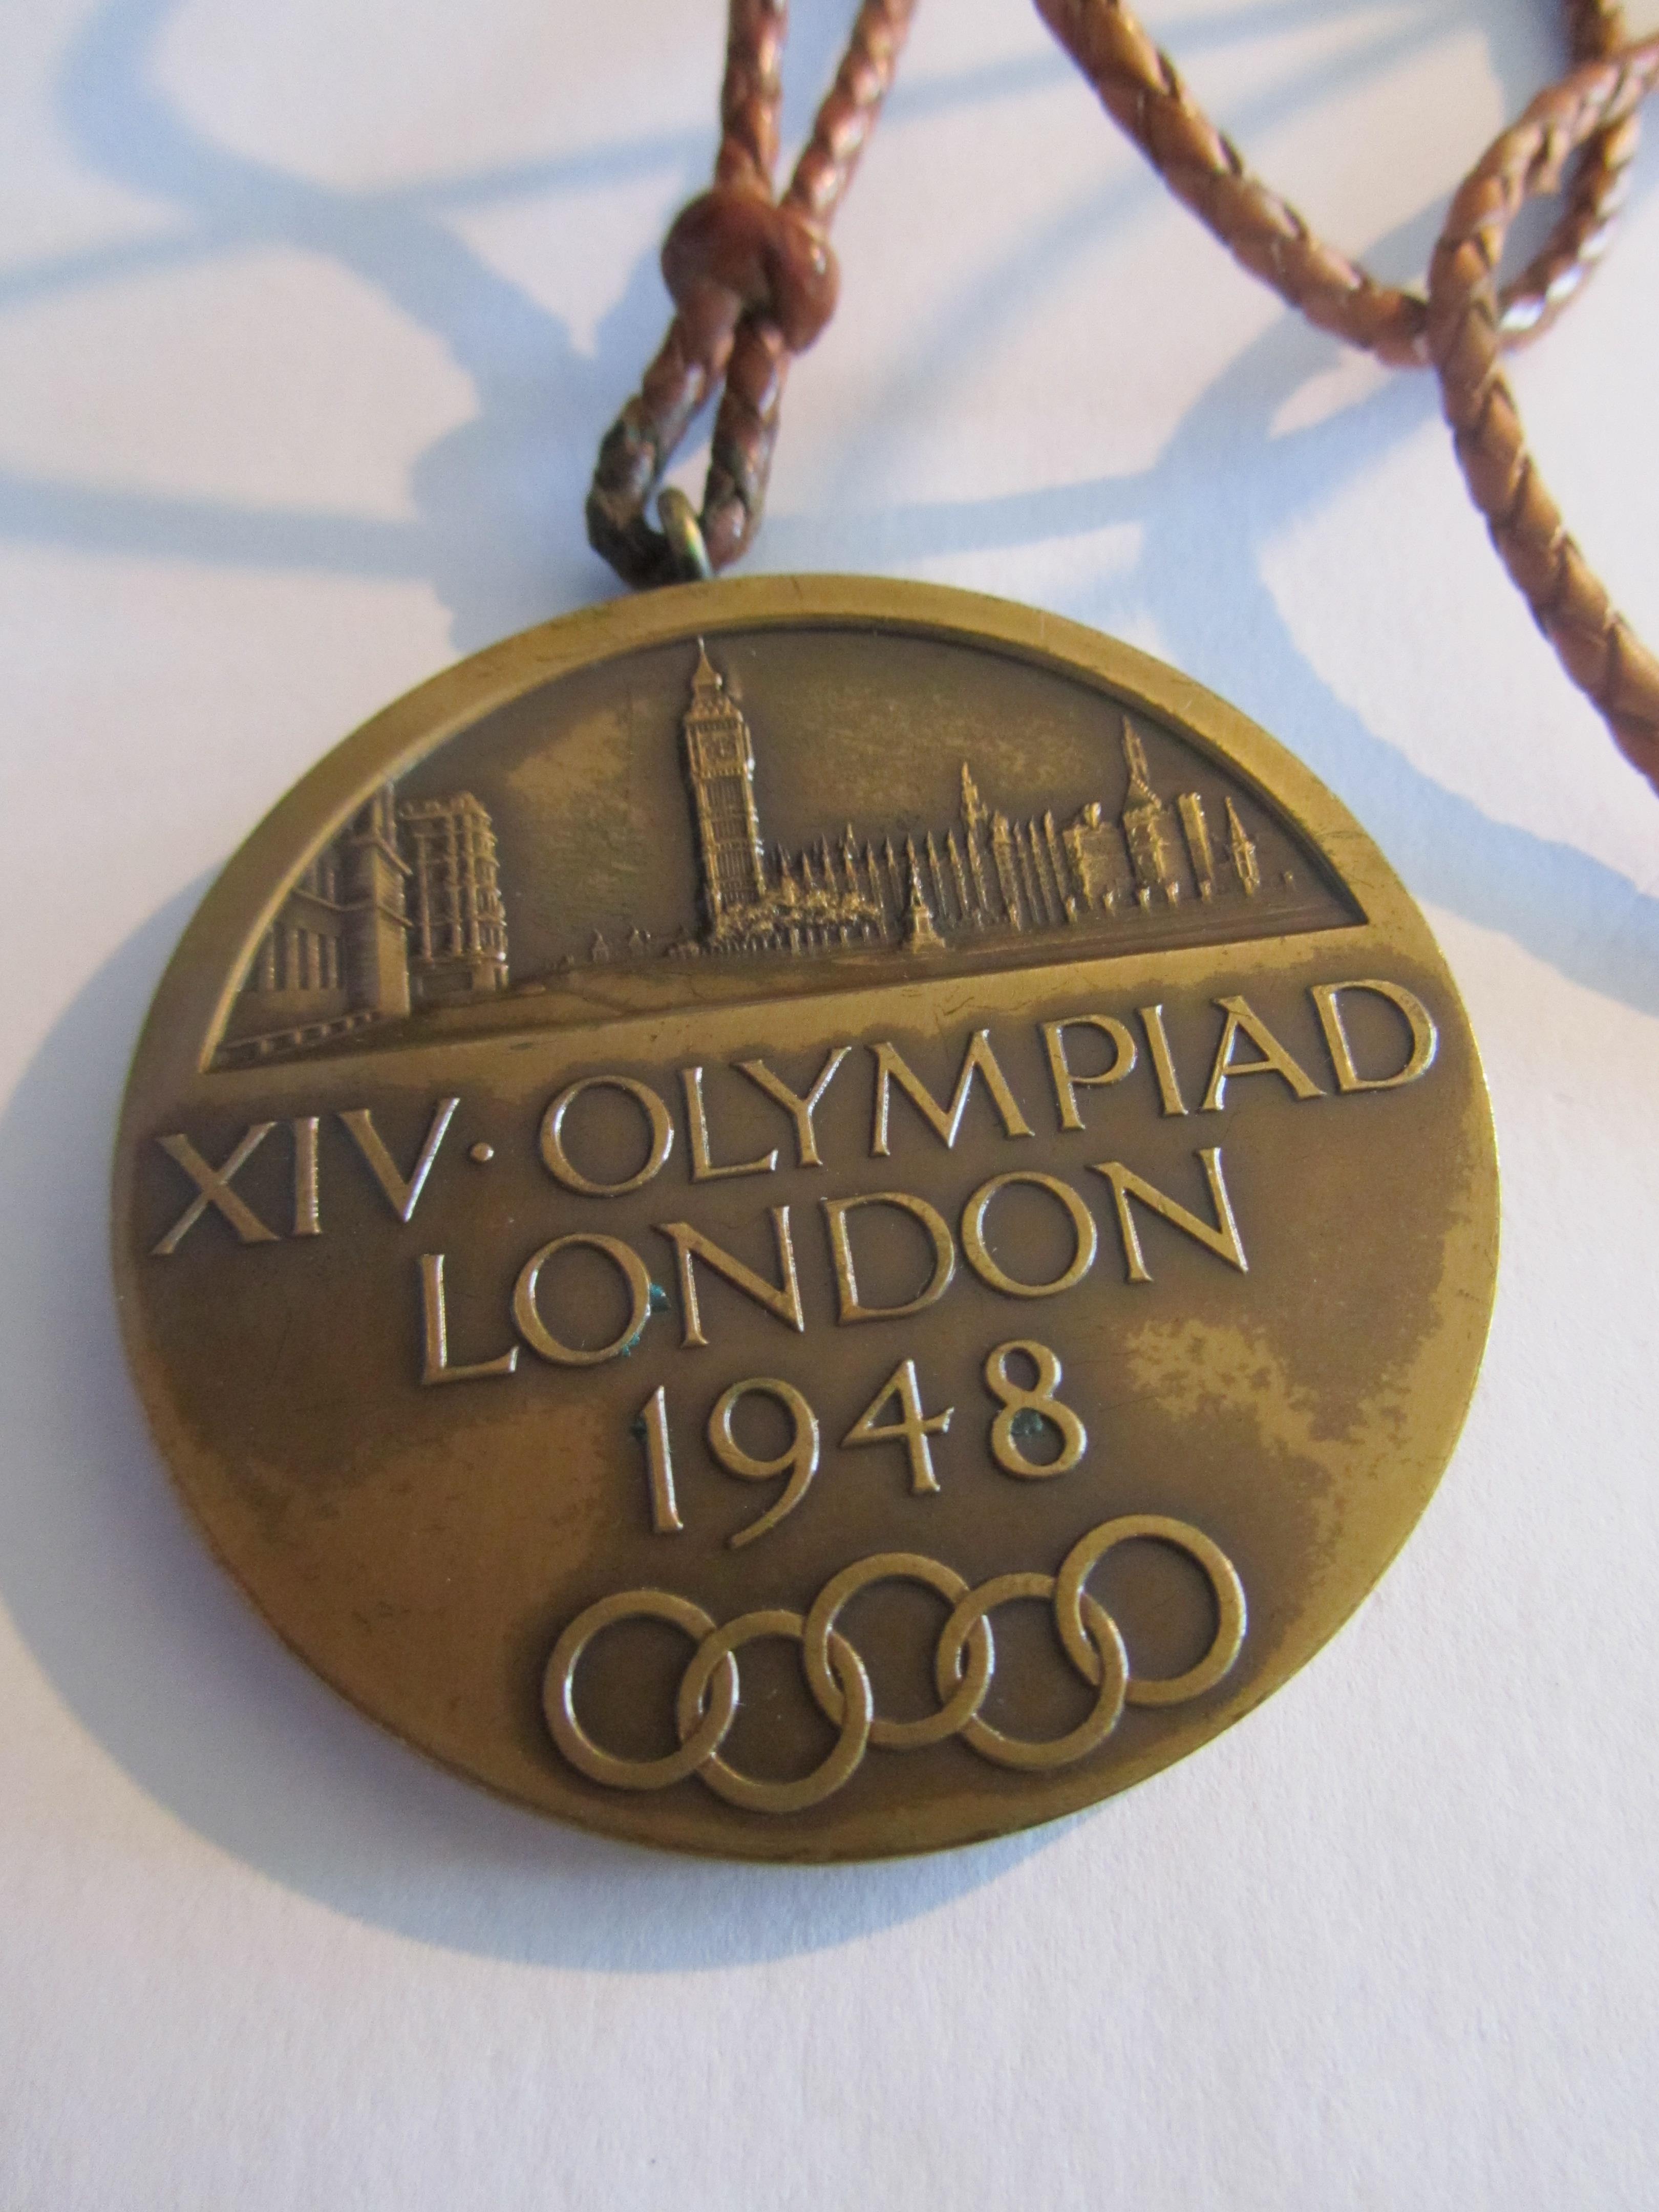 London 1948 London Olympic Games participant's medal, designed by B Mackennal, - Image 3 of 5